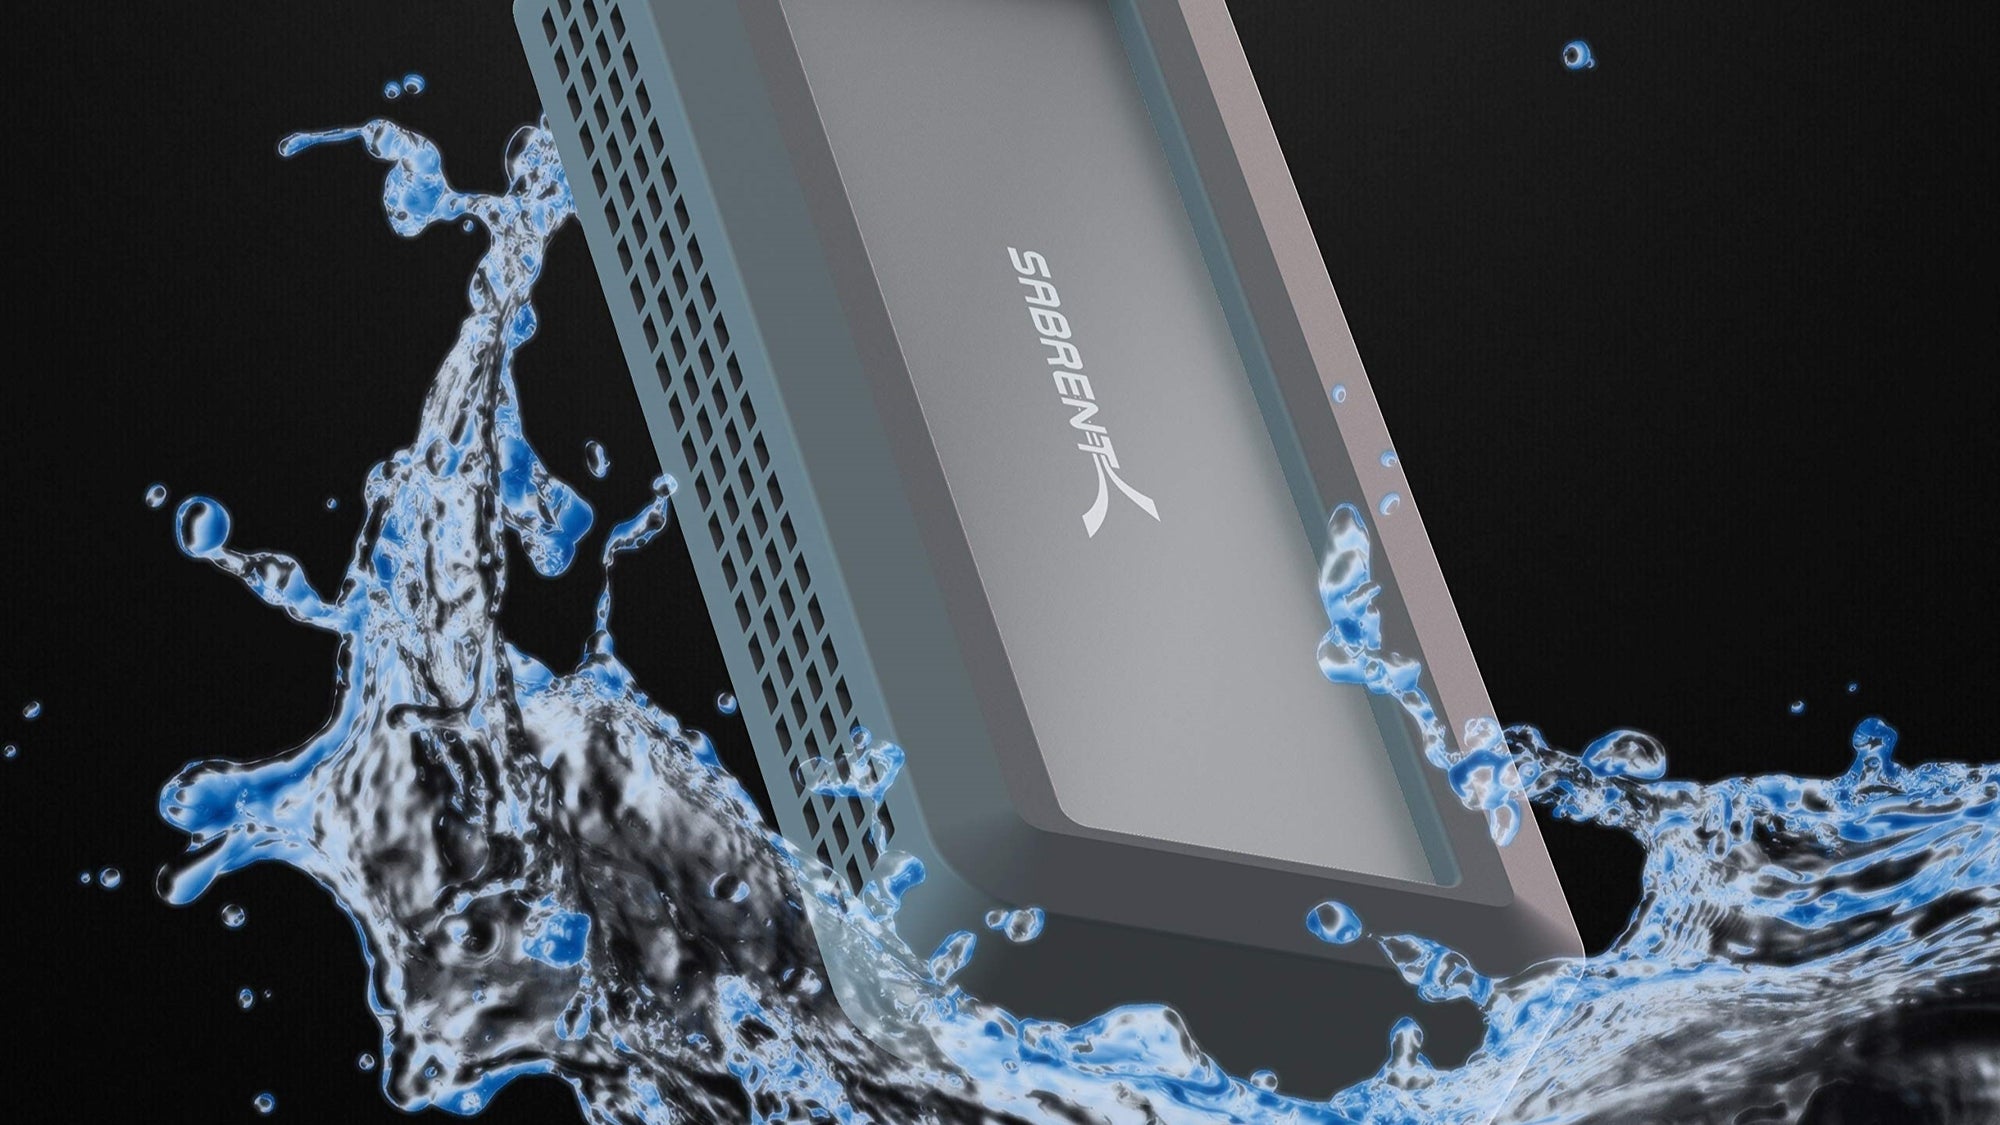 Designing Rugged Storage Devices for All Conditions